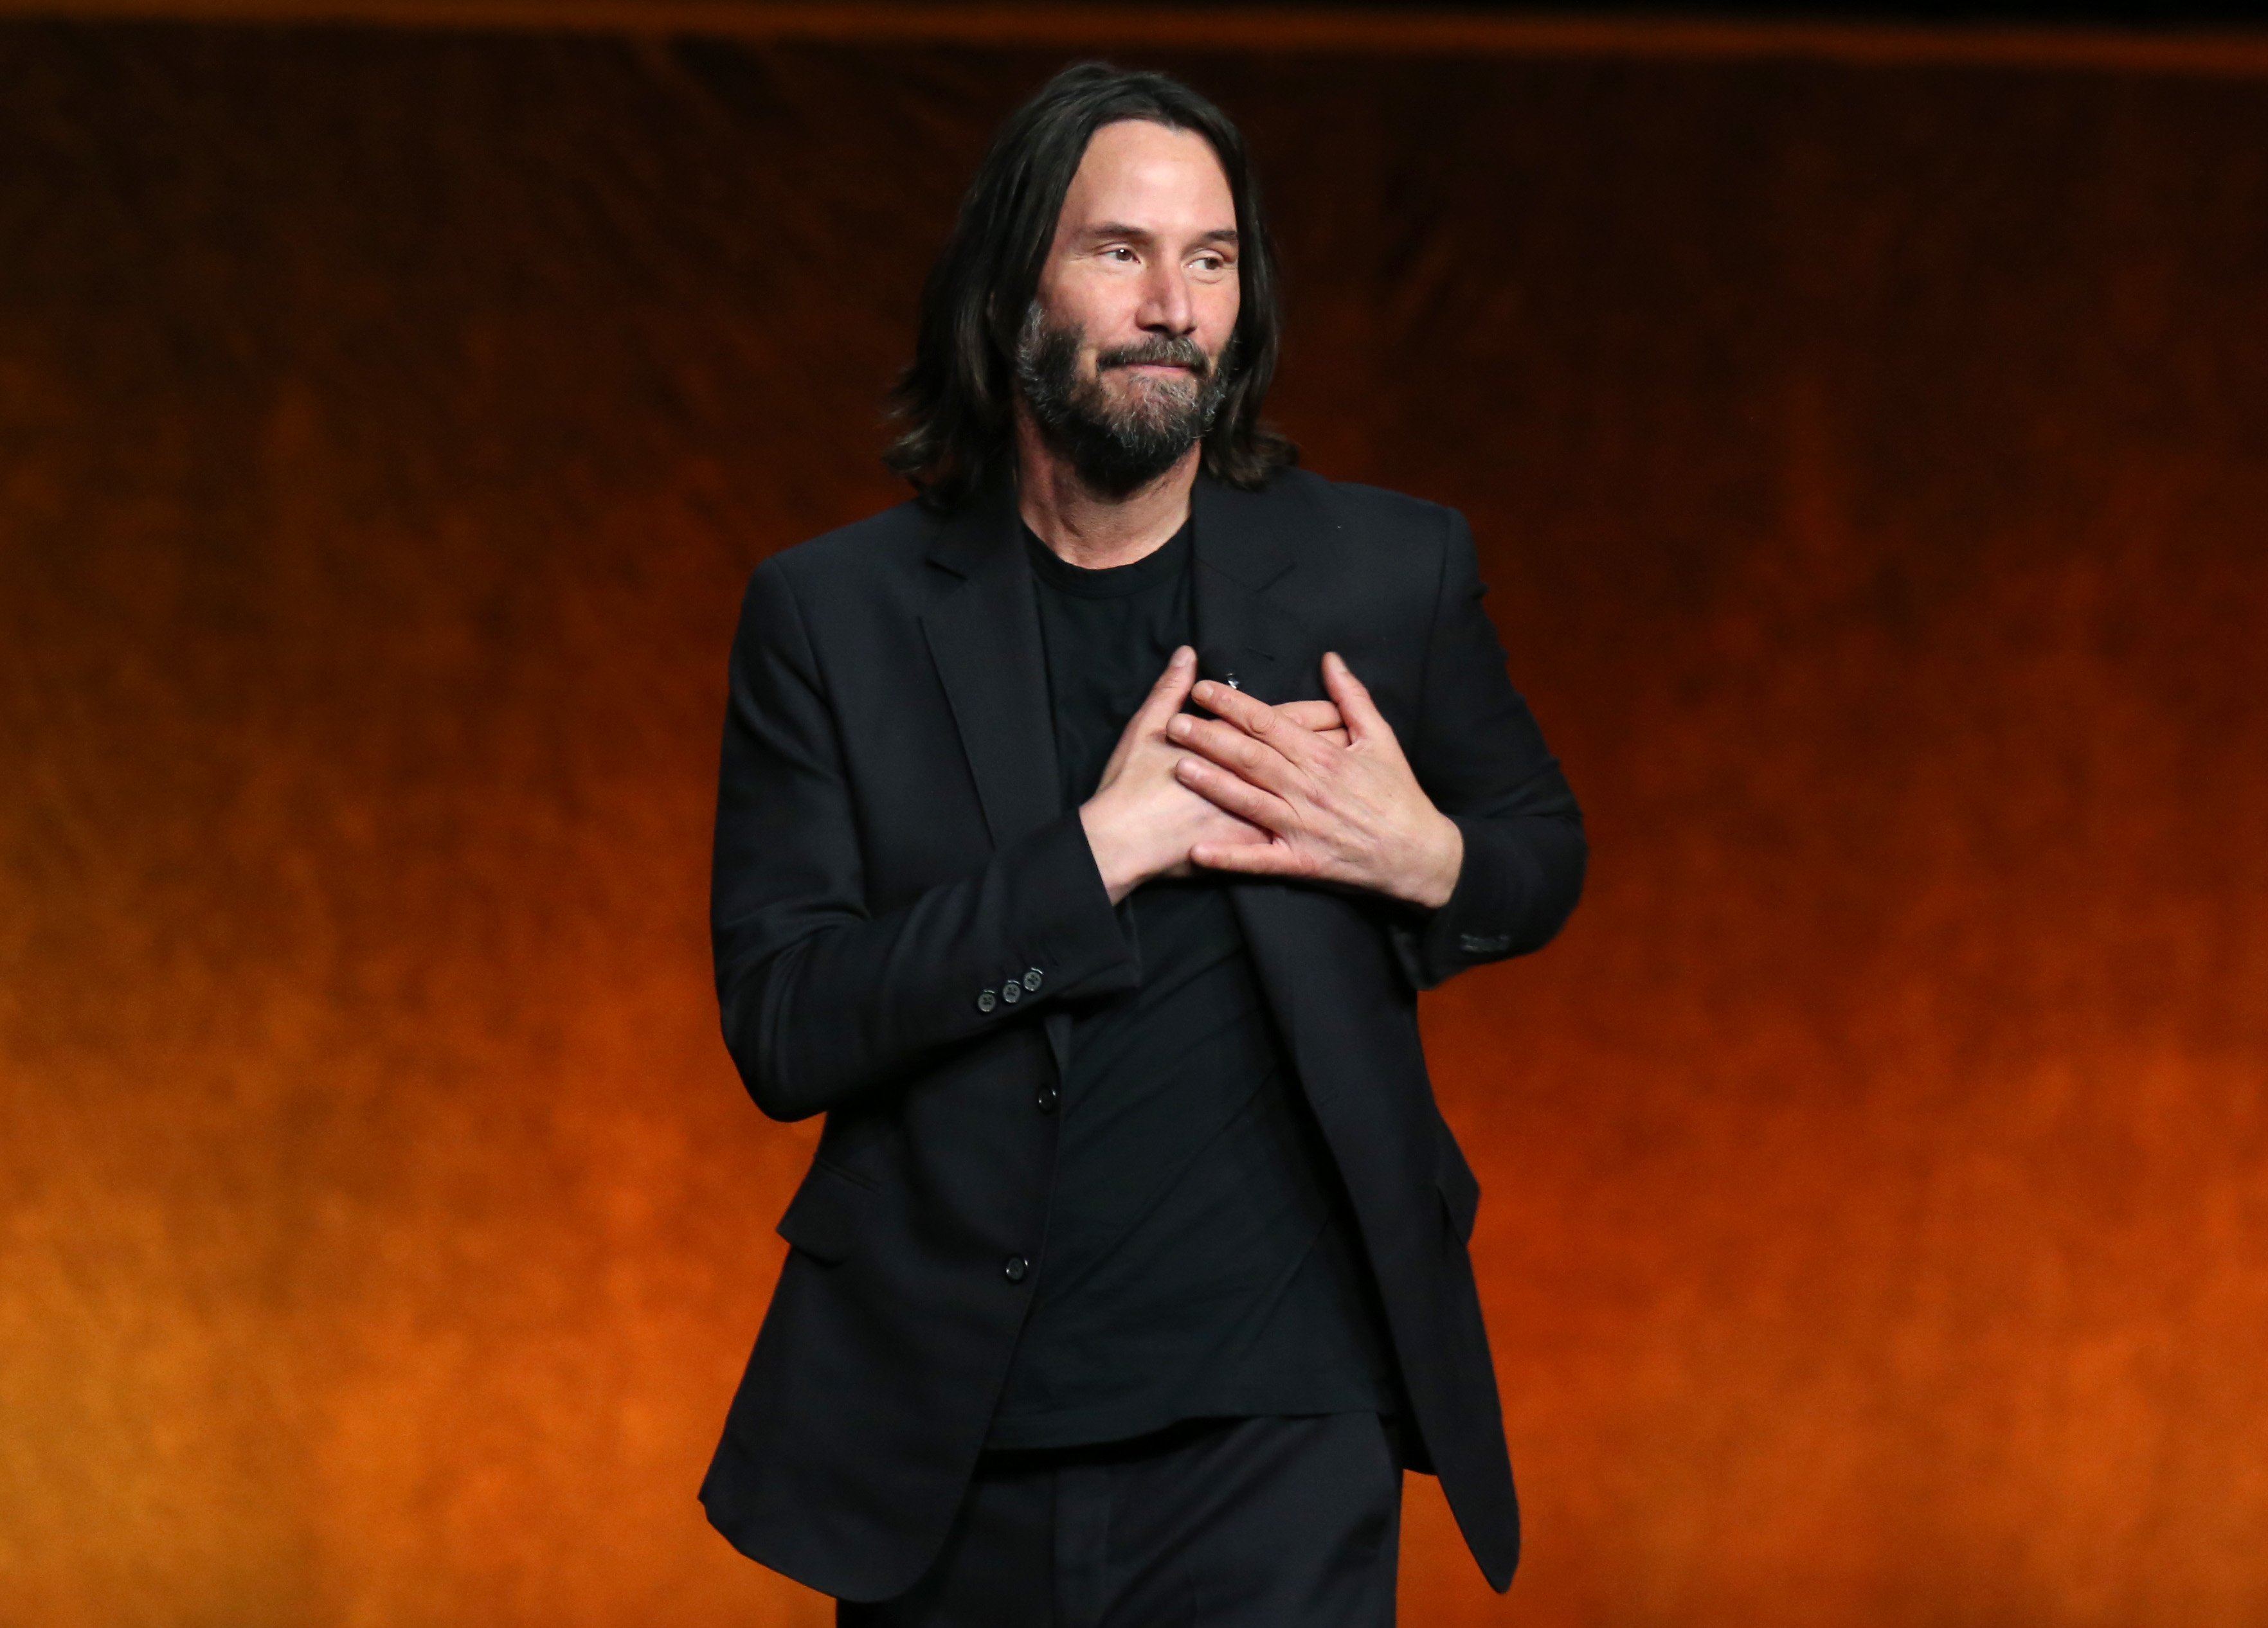 Keanu Reeves speaks about his upcoming movie "John Wick: Chapter 4" during Lionsgate exclusive presentation at Caesars Palace during CinemaCon 2022, on April 28, 2022, in Las Vegas, Nevada. | Source: Getty Images